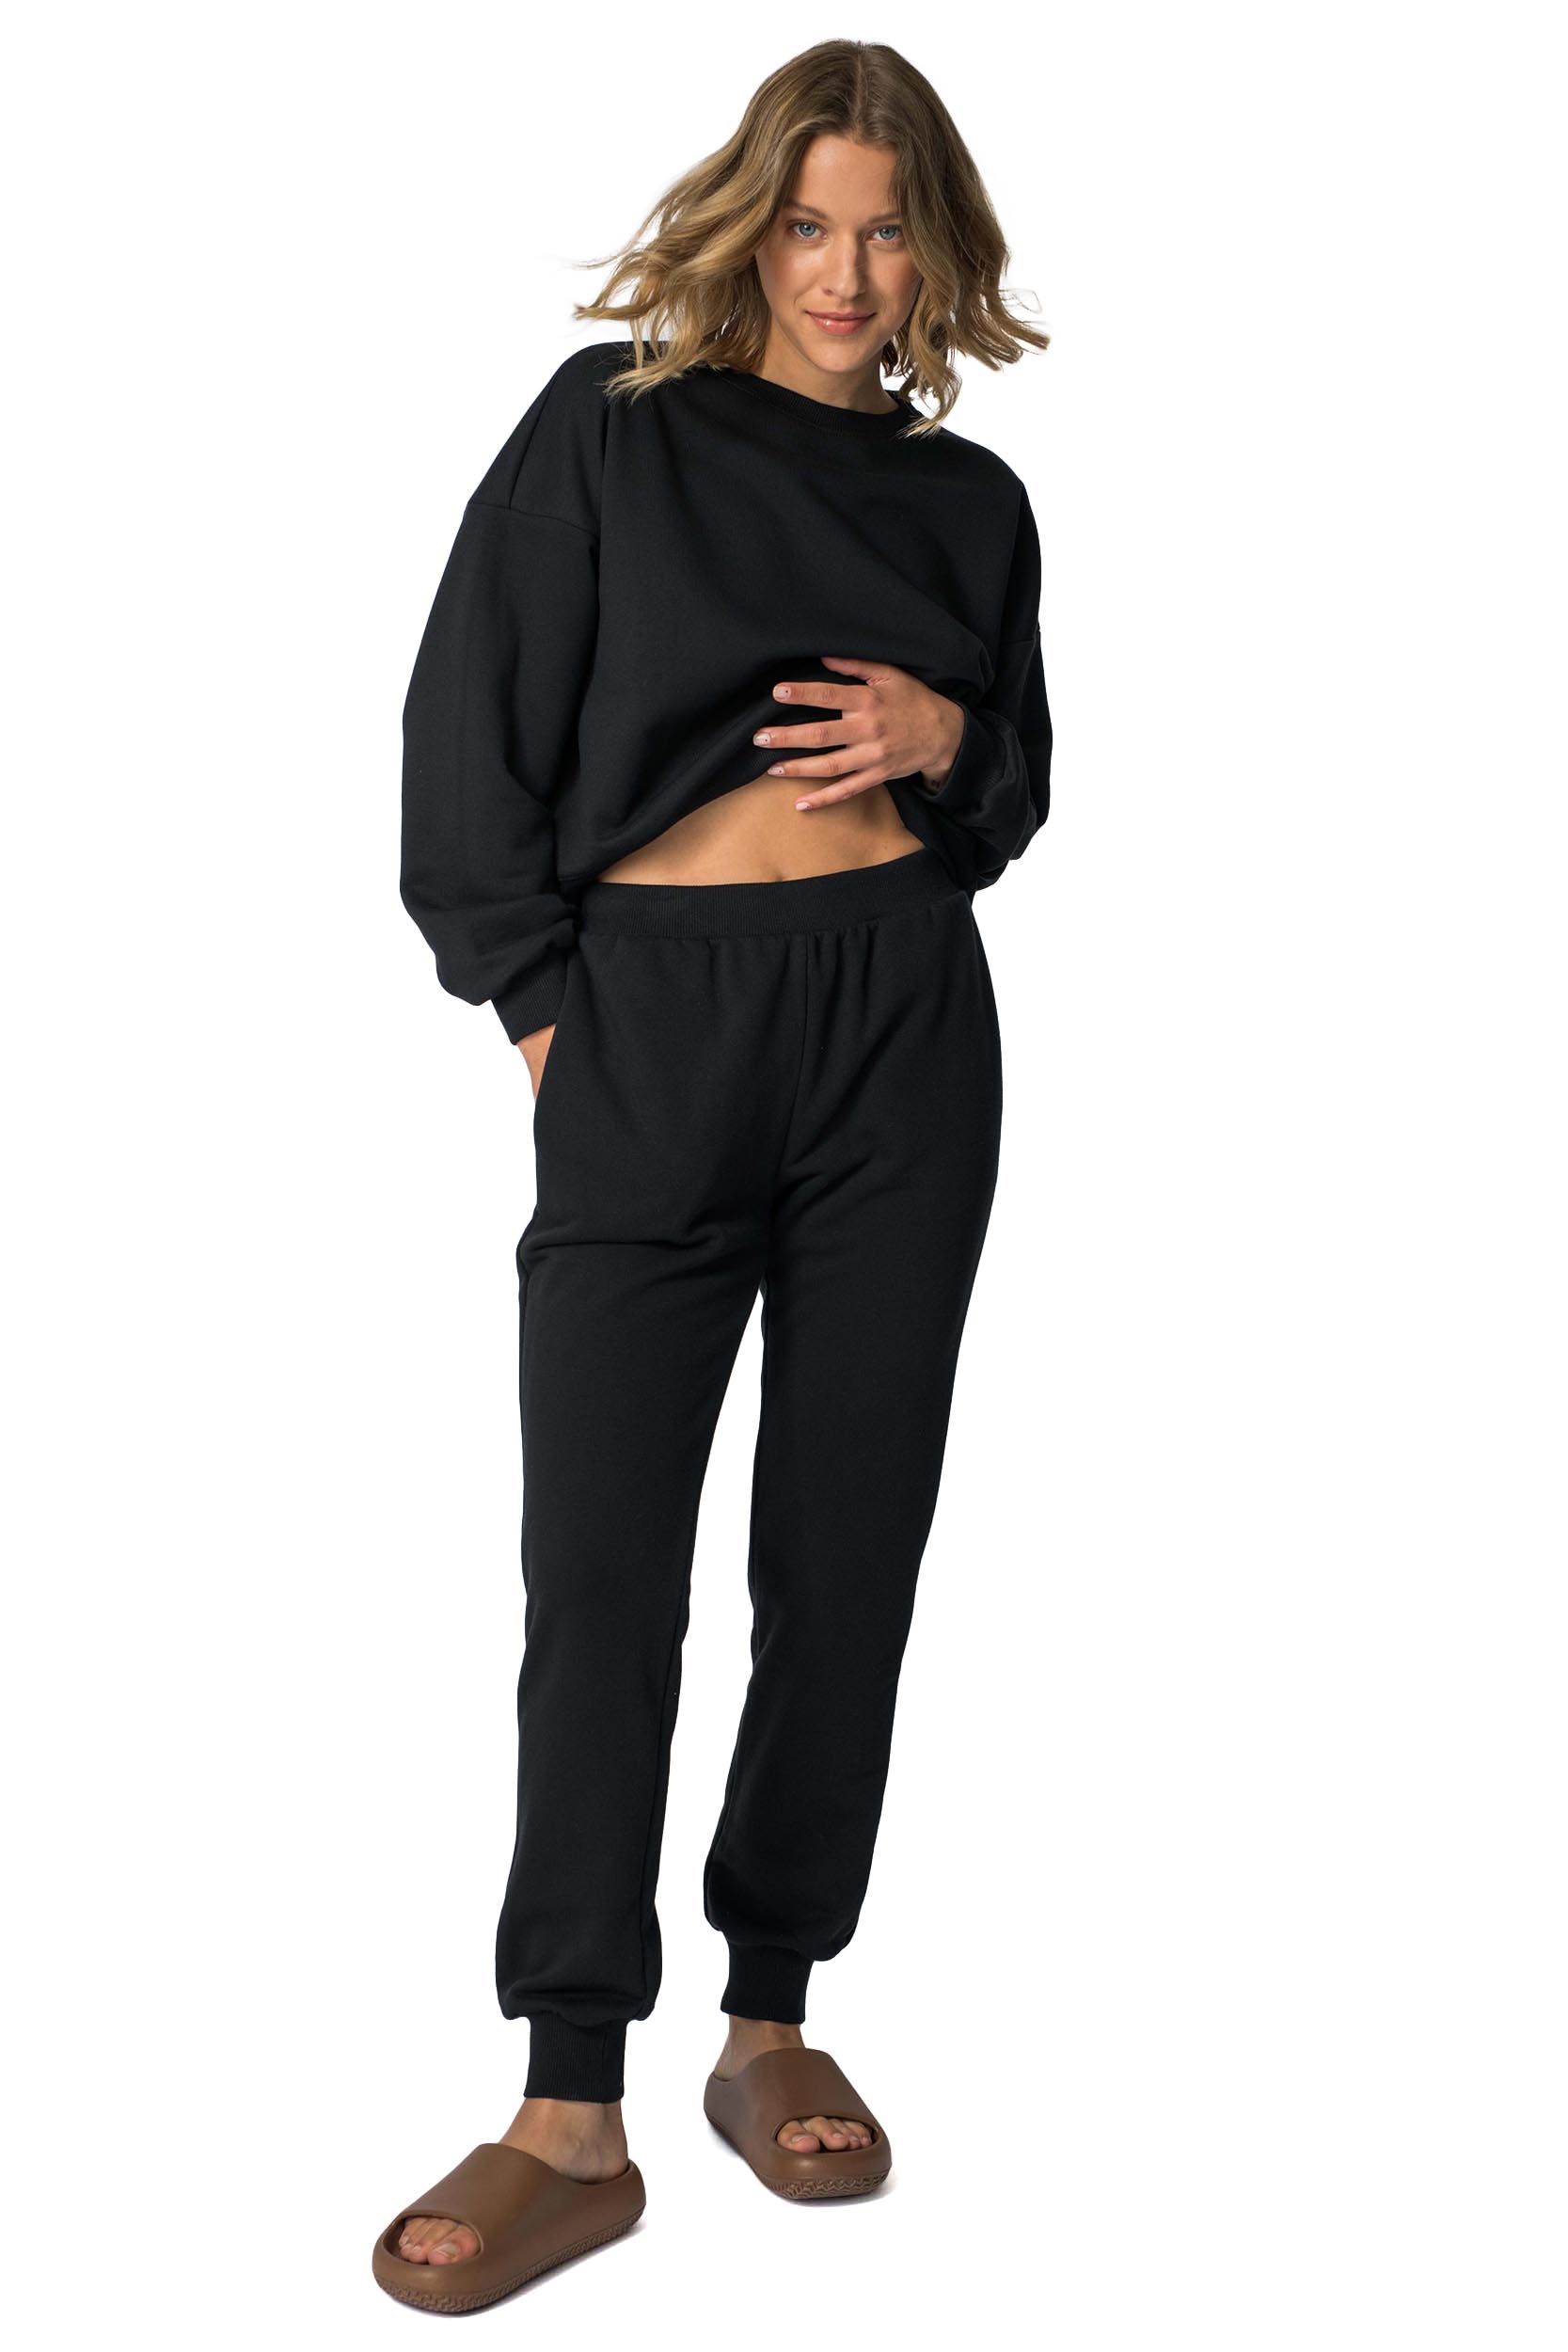 Tracksuit trousers model 167834 LaLupa